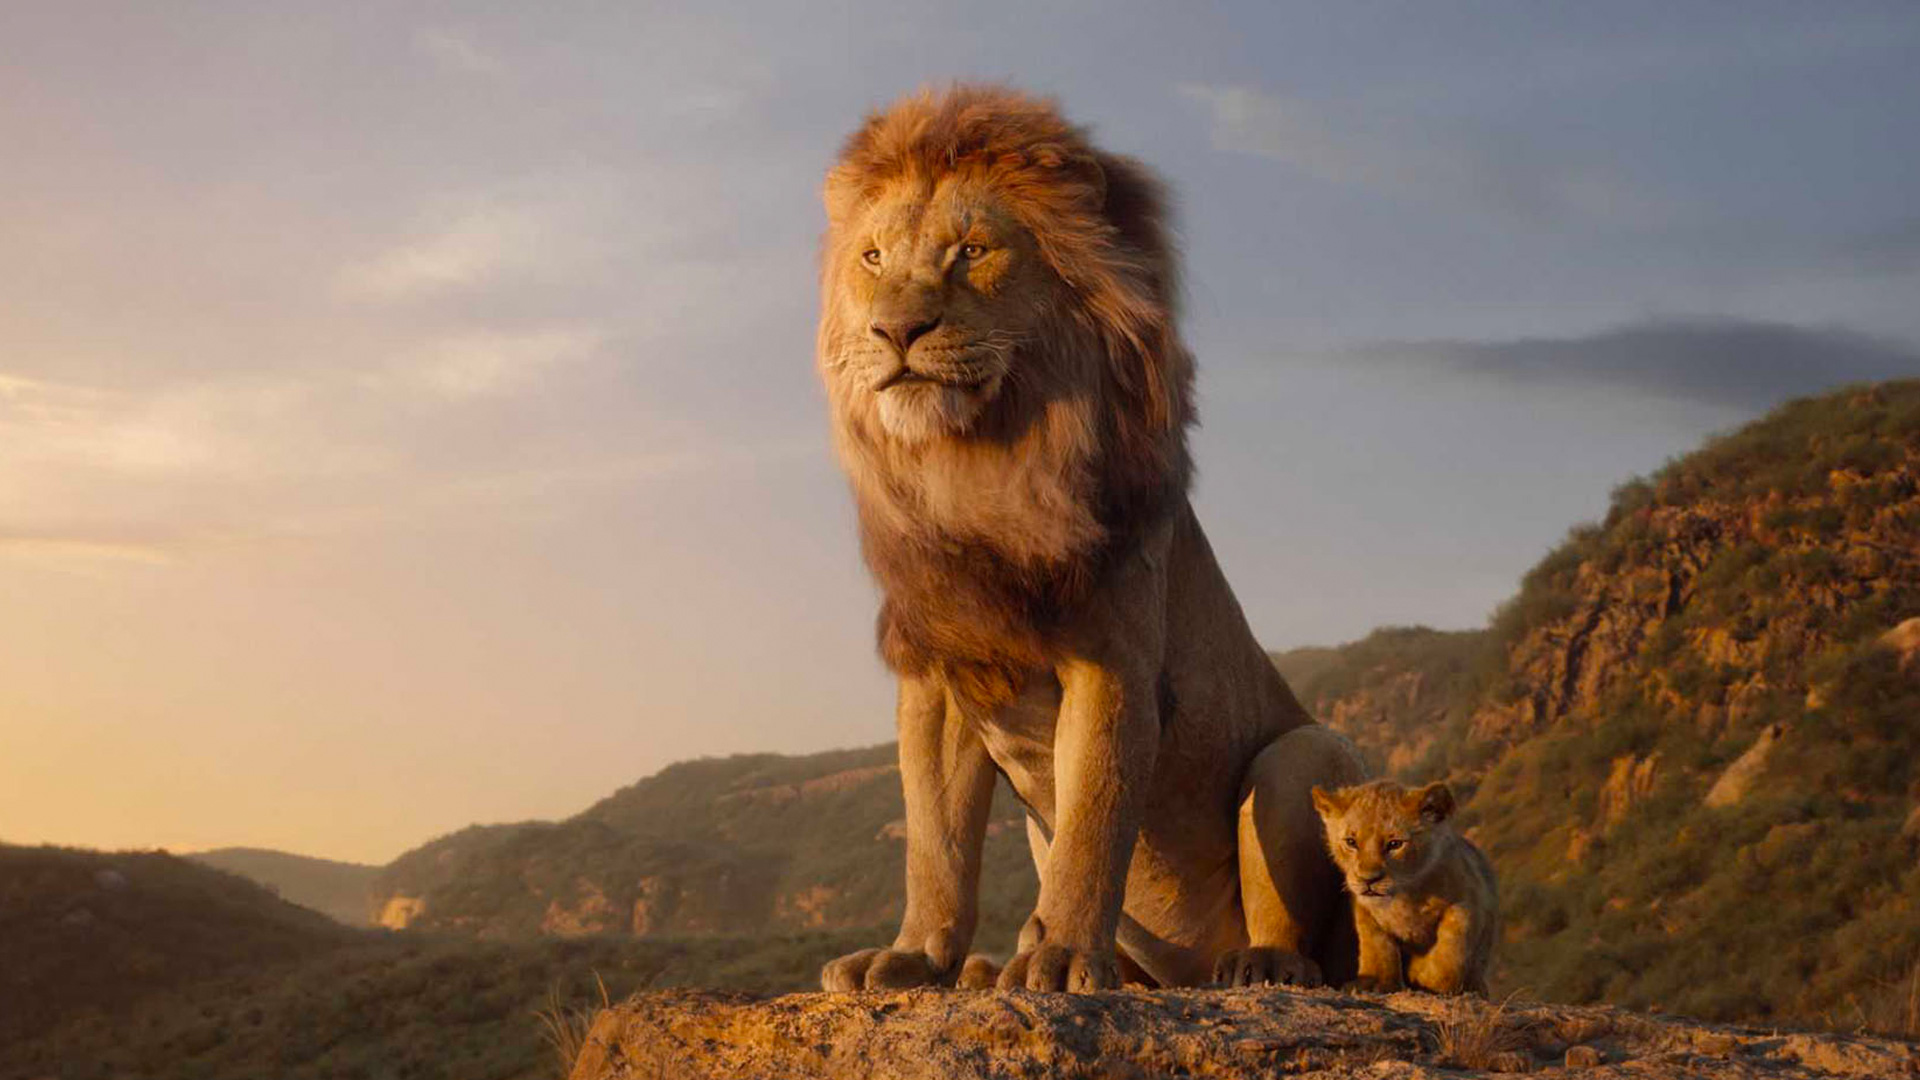 A scene from the 2019 film The Lion King